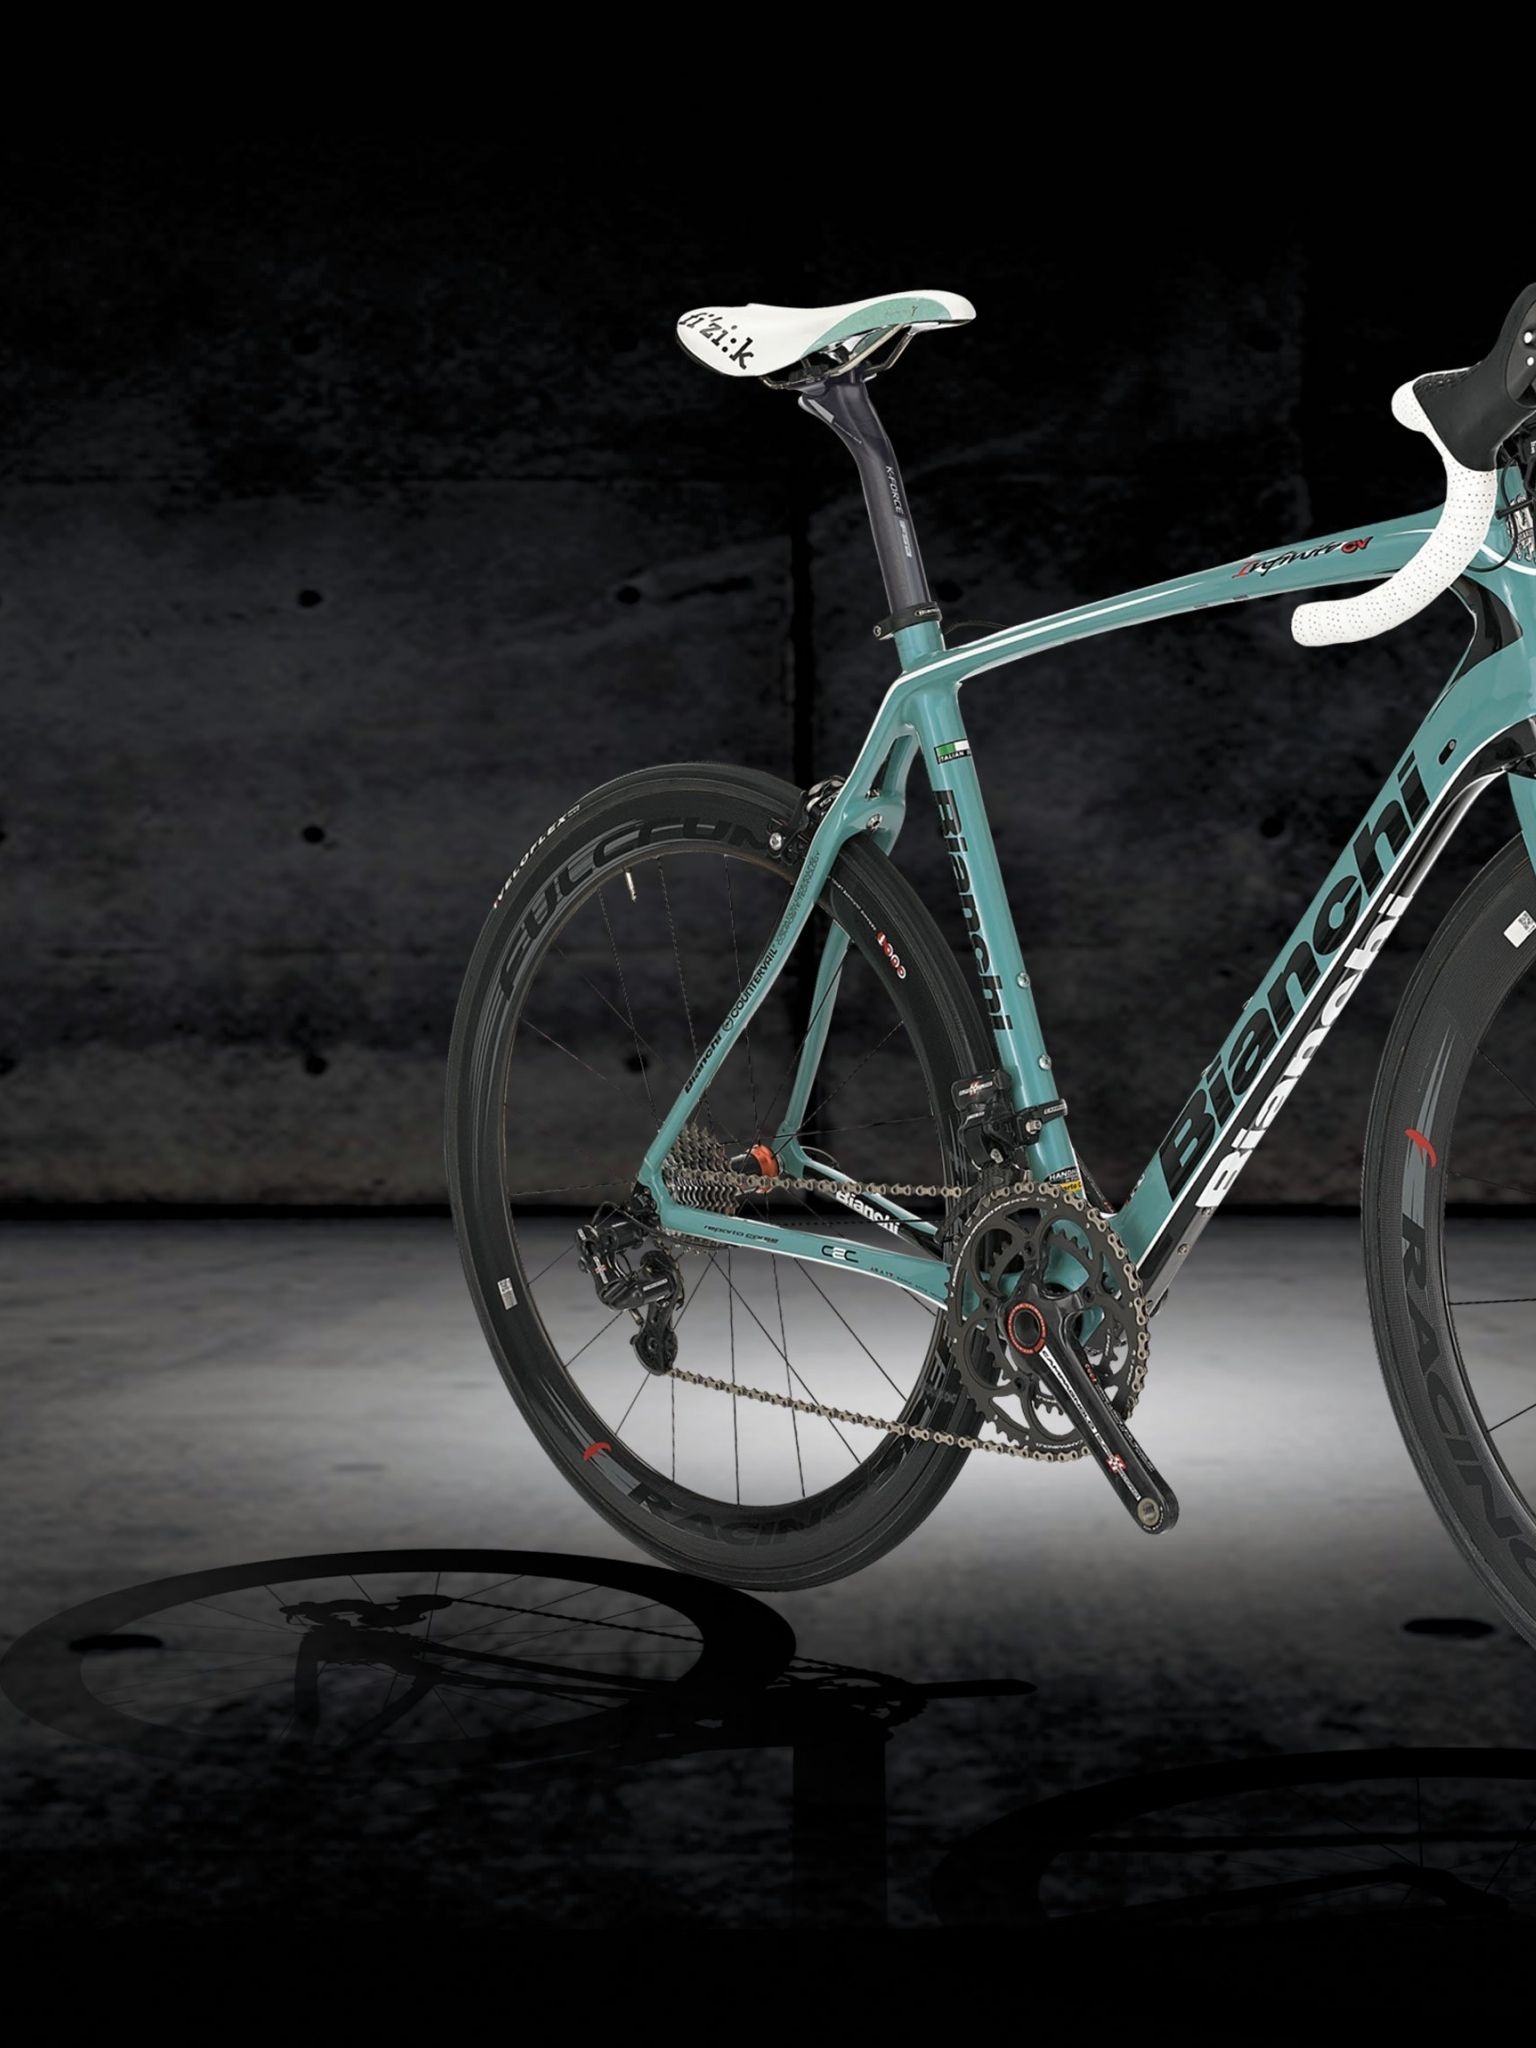 Bianchi sports, Bicycle android wallpaper, Ethan Walker, Master the elements, 1540x2050 HD Handy